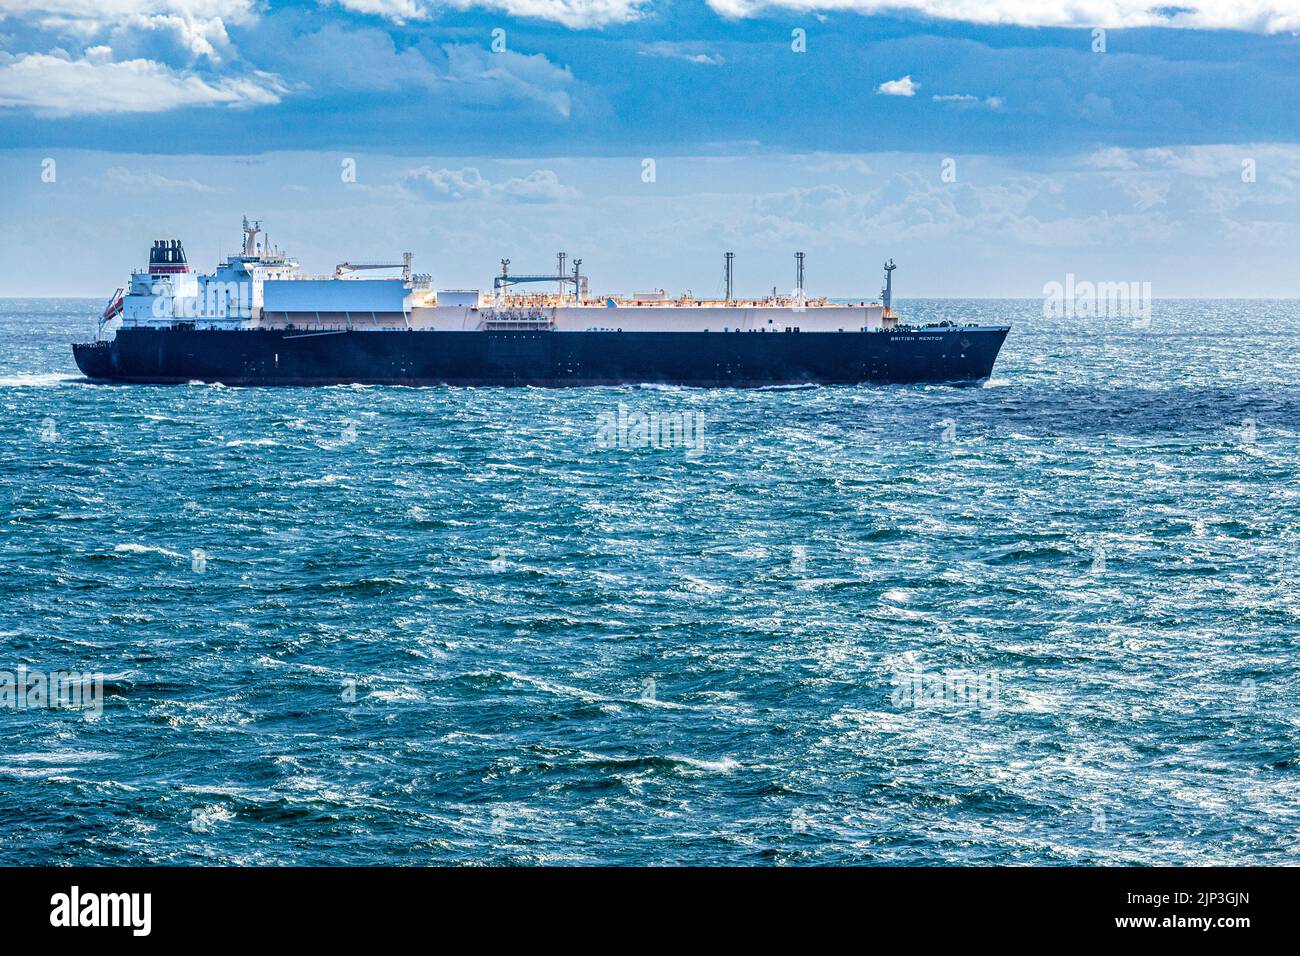 The LNG tanker British Mentor sailing in choppy seas in the Kattegat off the coast of Denmark Stock Photo